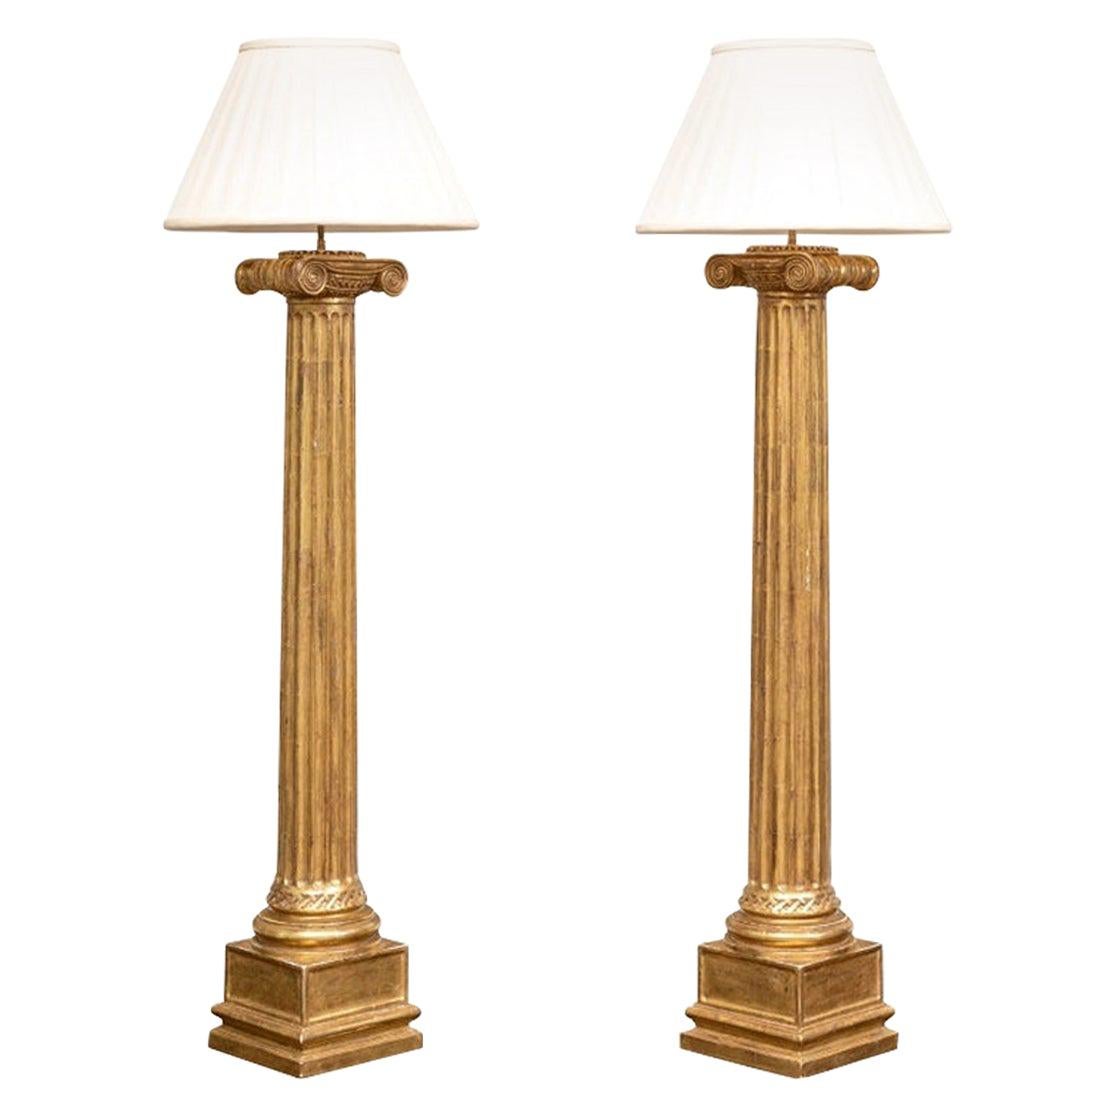 Pair of Antique Carved Wood Pillar Column Floor Lamps from circa 1890 For Sale at 1stDibs